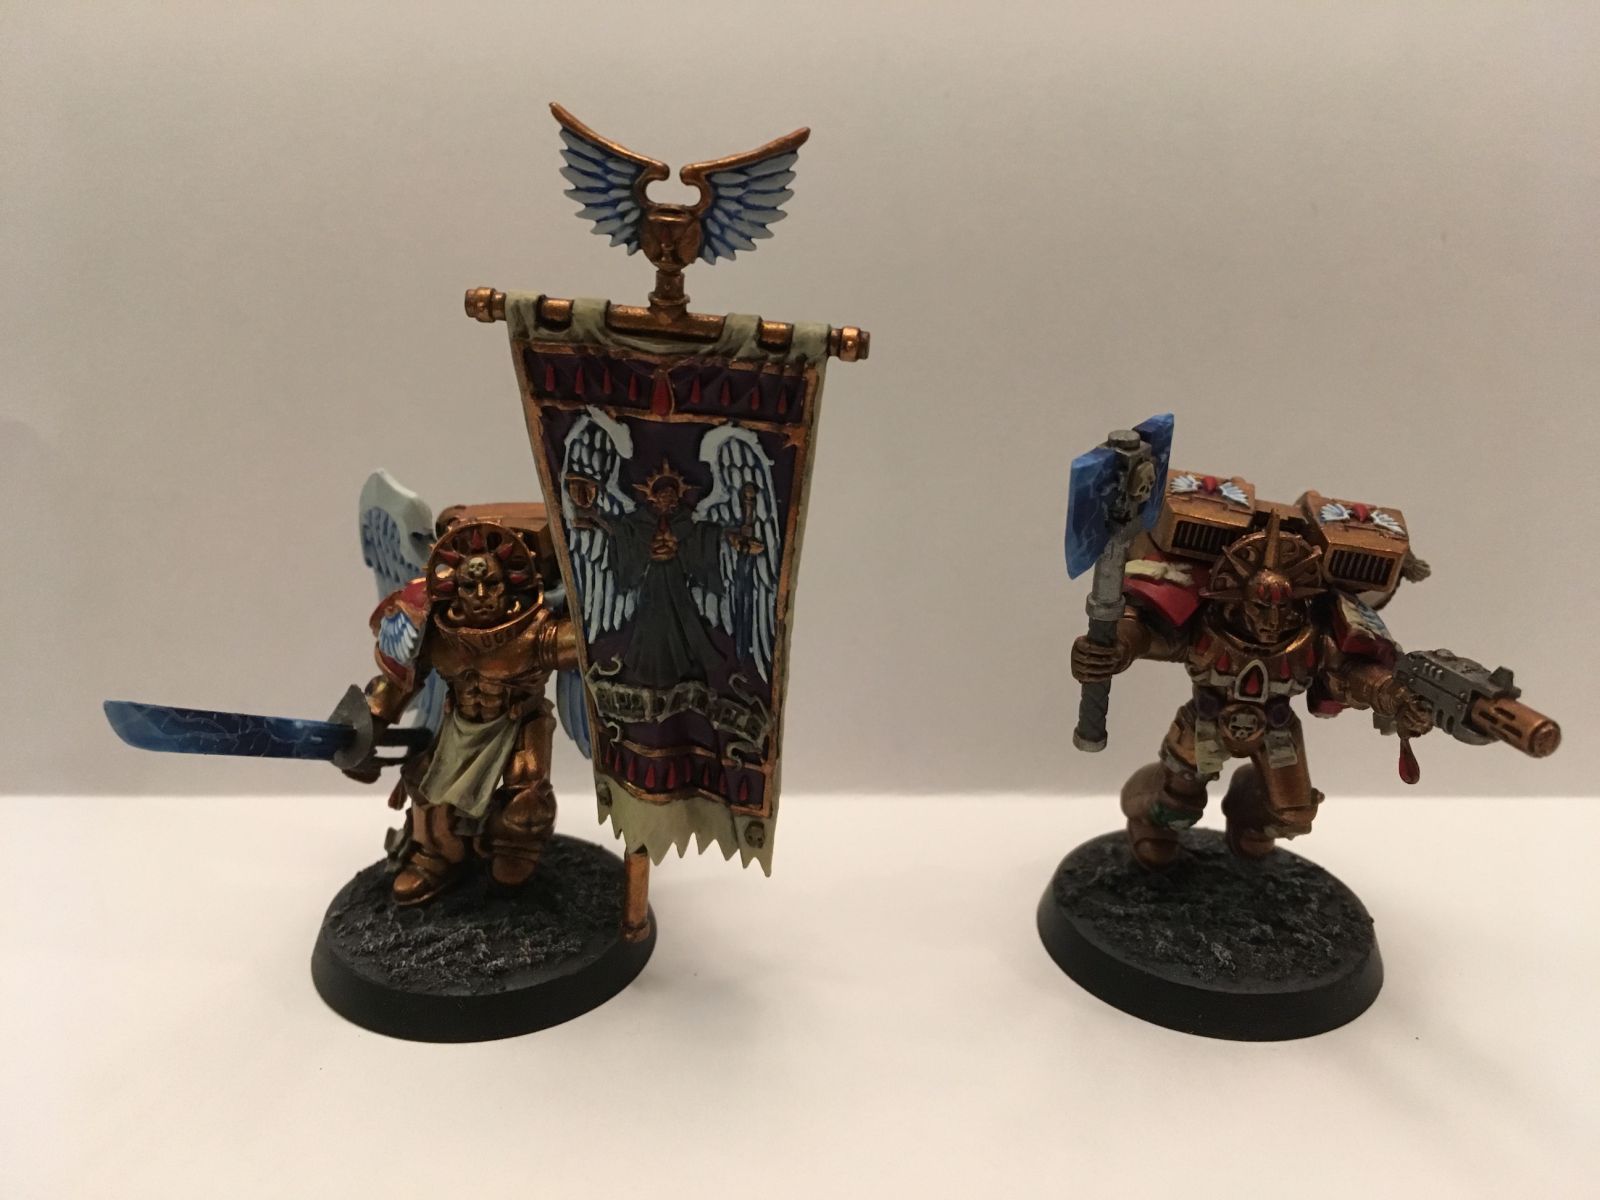 Sanguinary Ancient and Dante Based